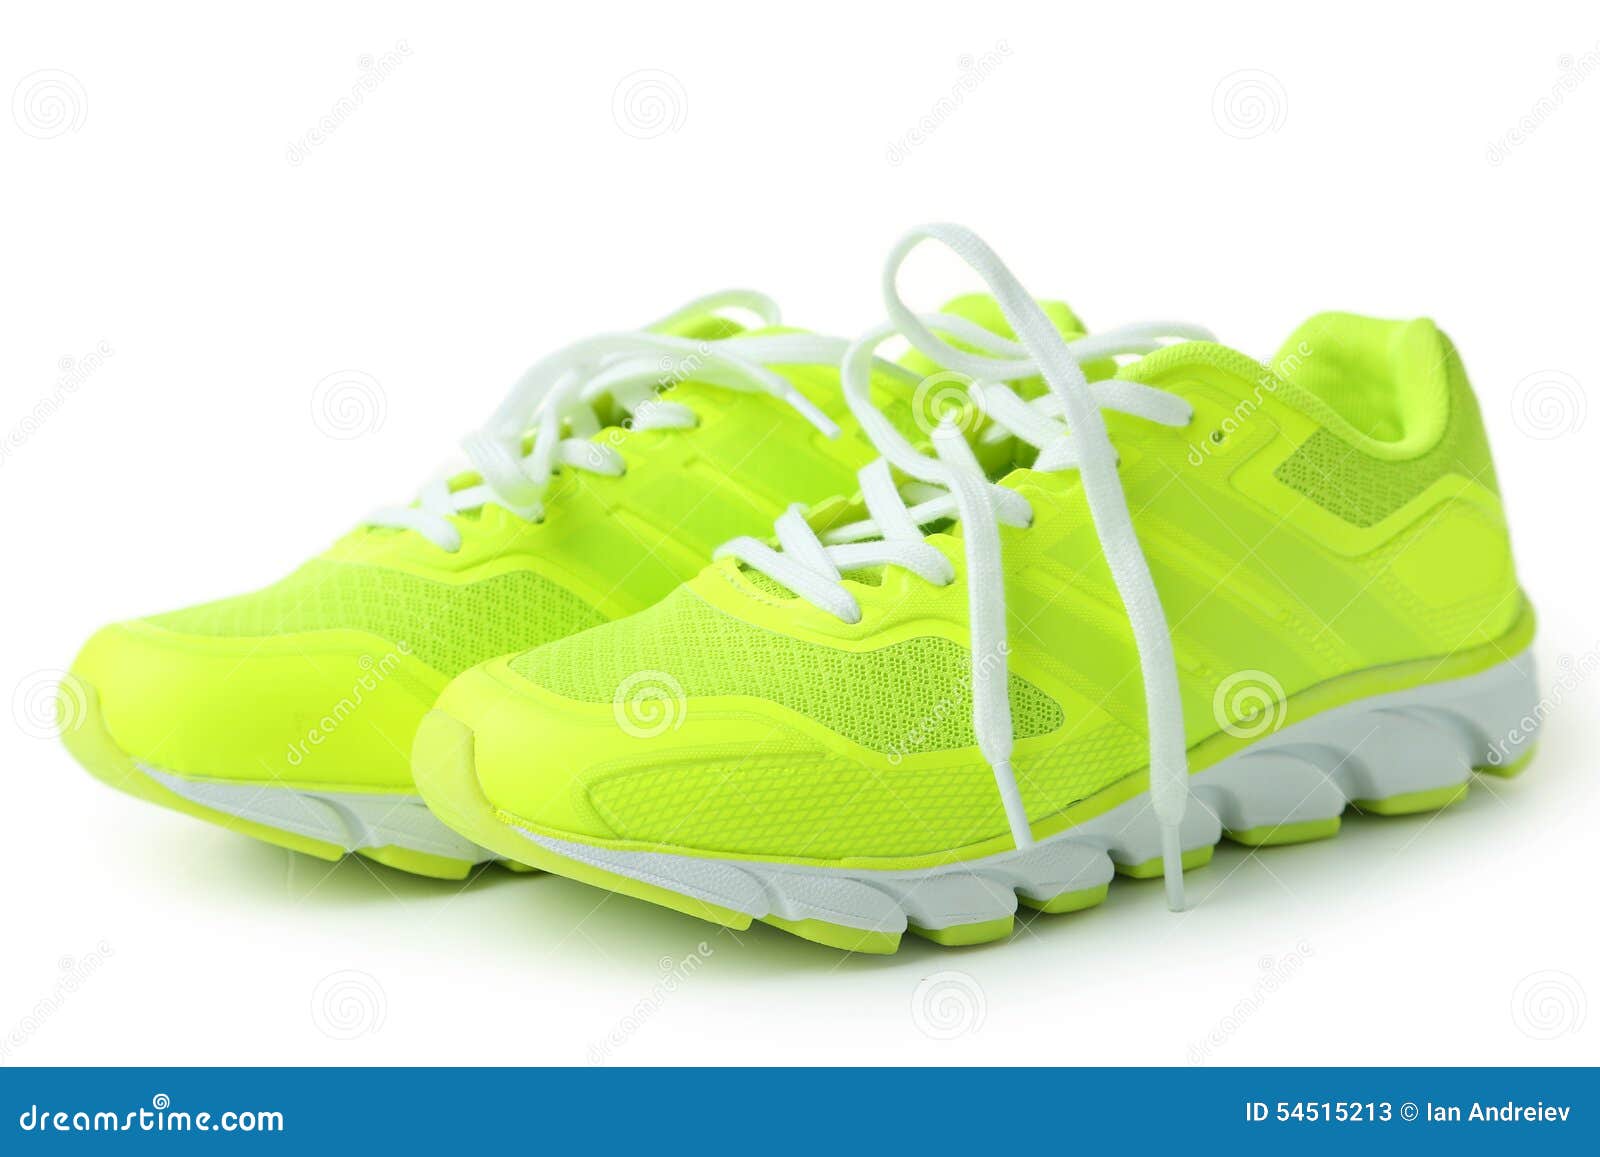 Pair of sport shoes stock image. Image of expensive, girl - 54515213